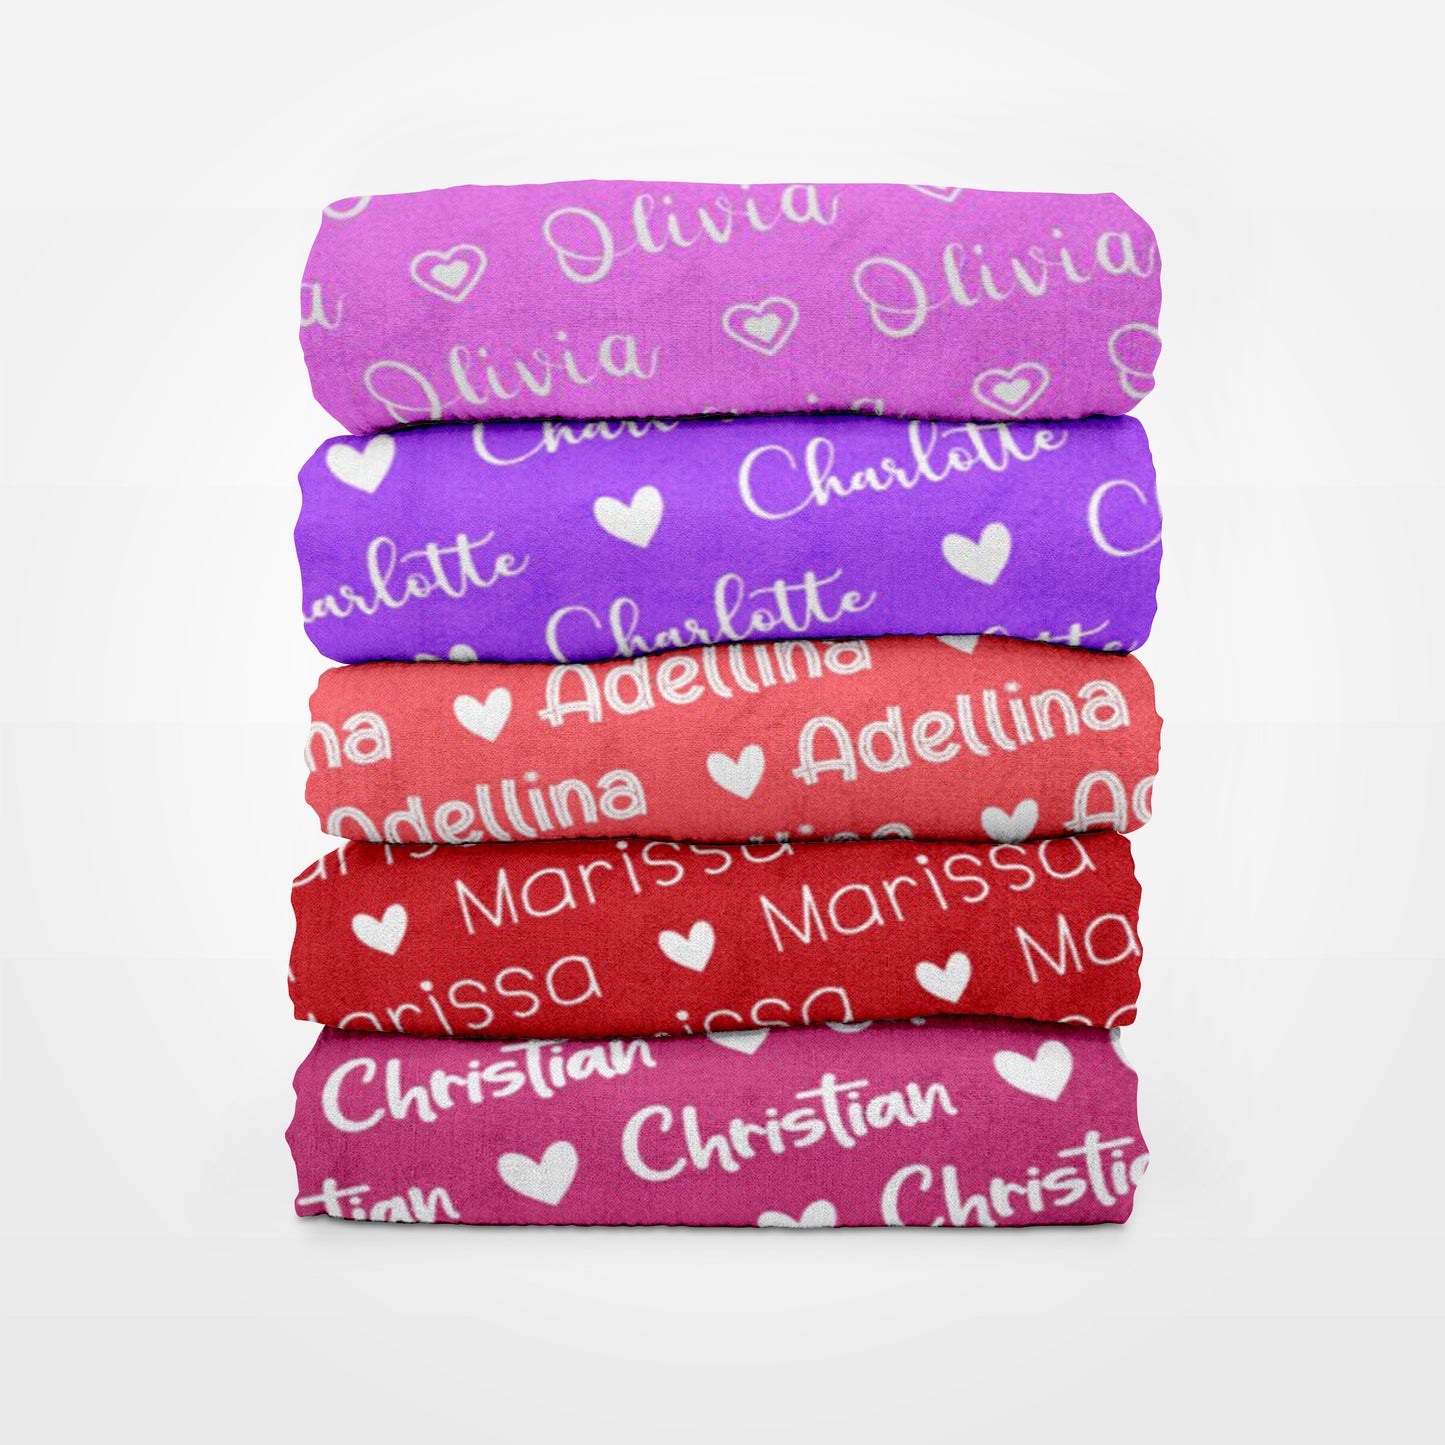 Hearts Personalized Blanket - Customizable Blanket - Personalized name blanket for Girls, custom name blanket for girls, personalized hearts blanket for girls